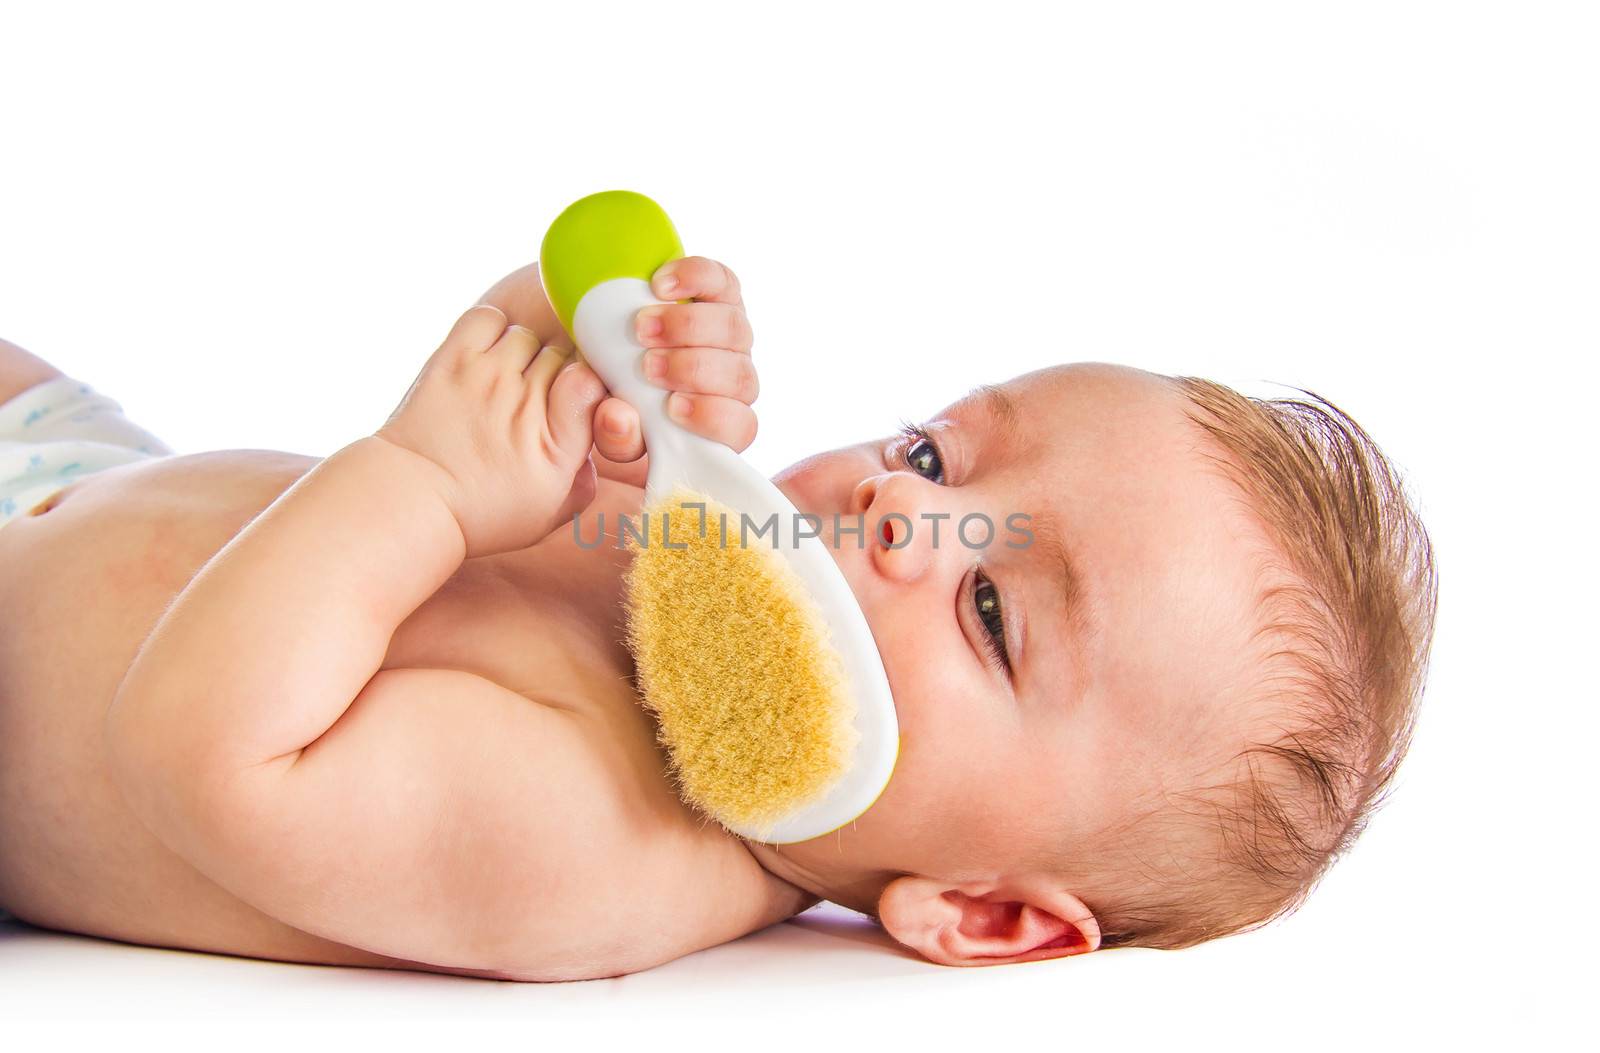 Baby with hairbrush by dynamicfoto